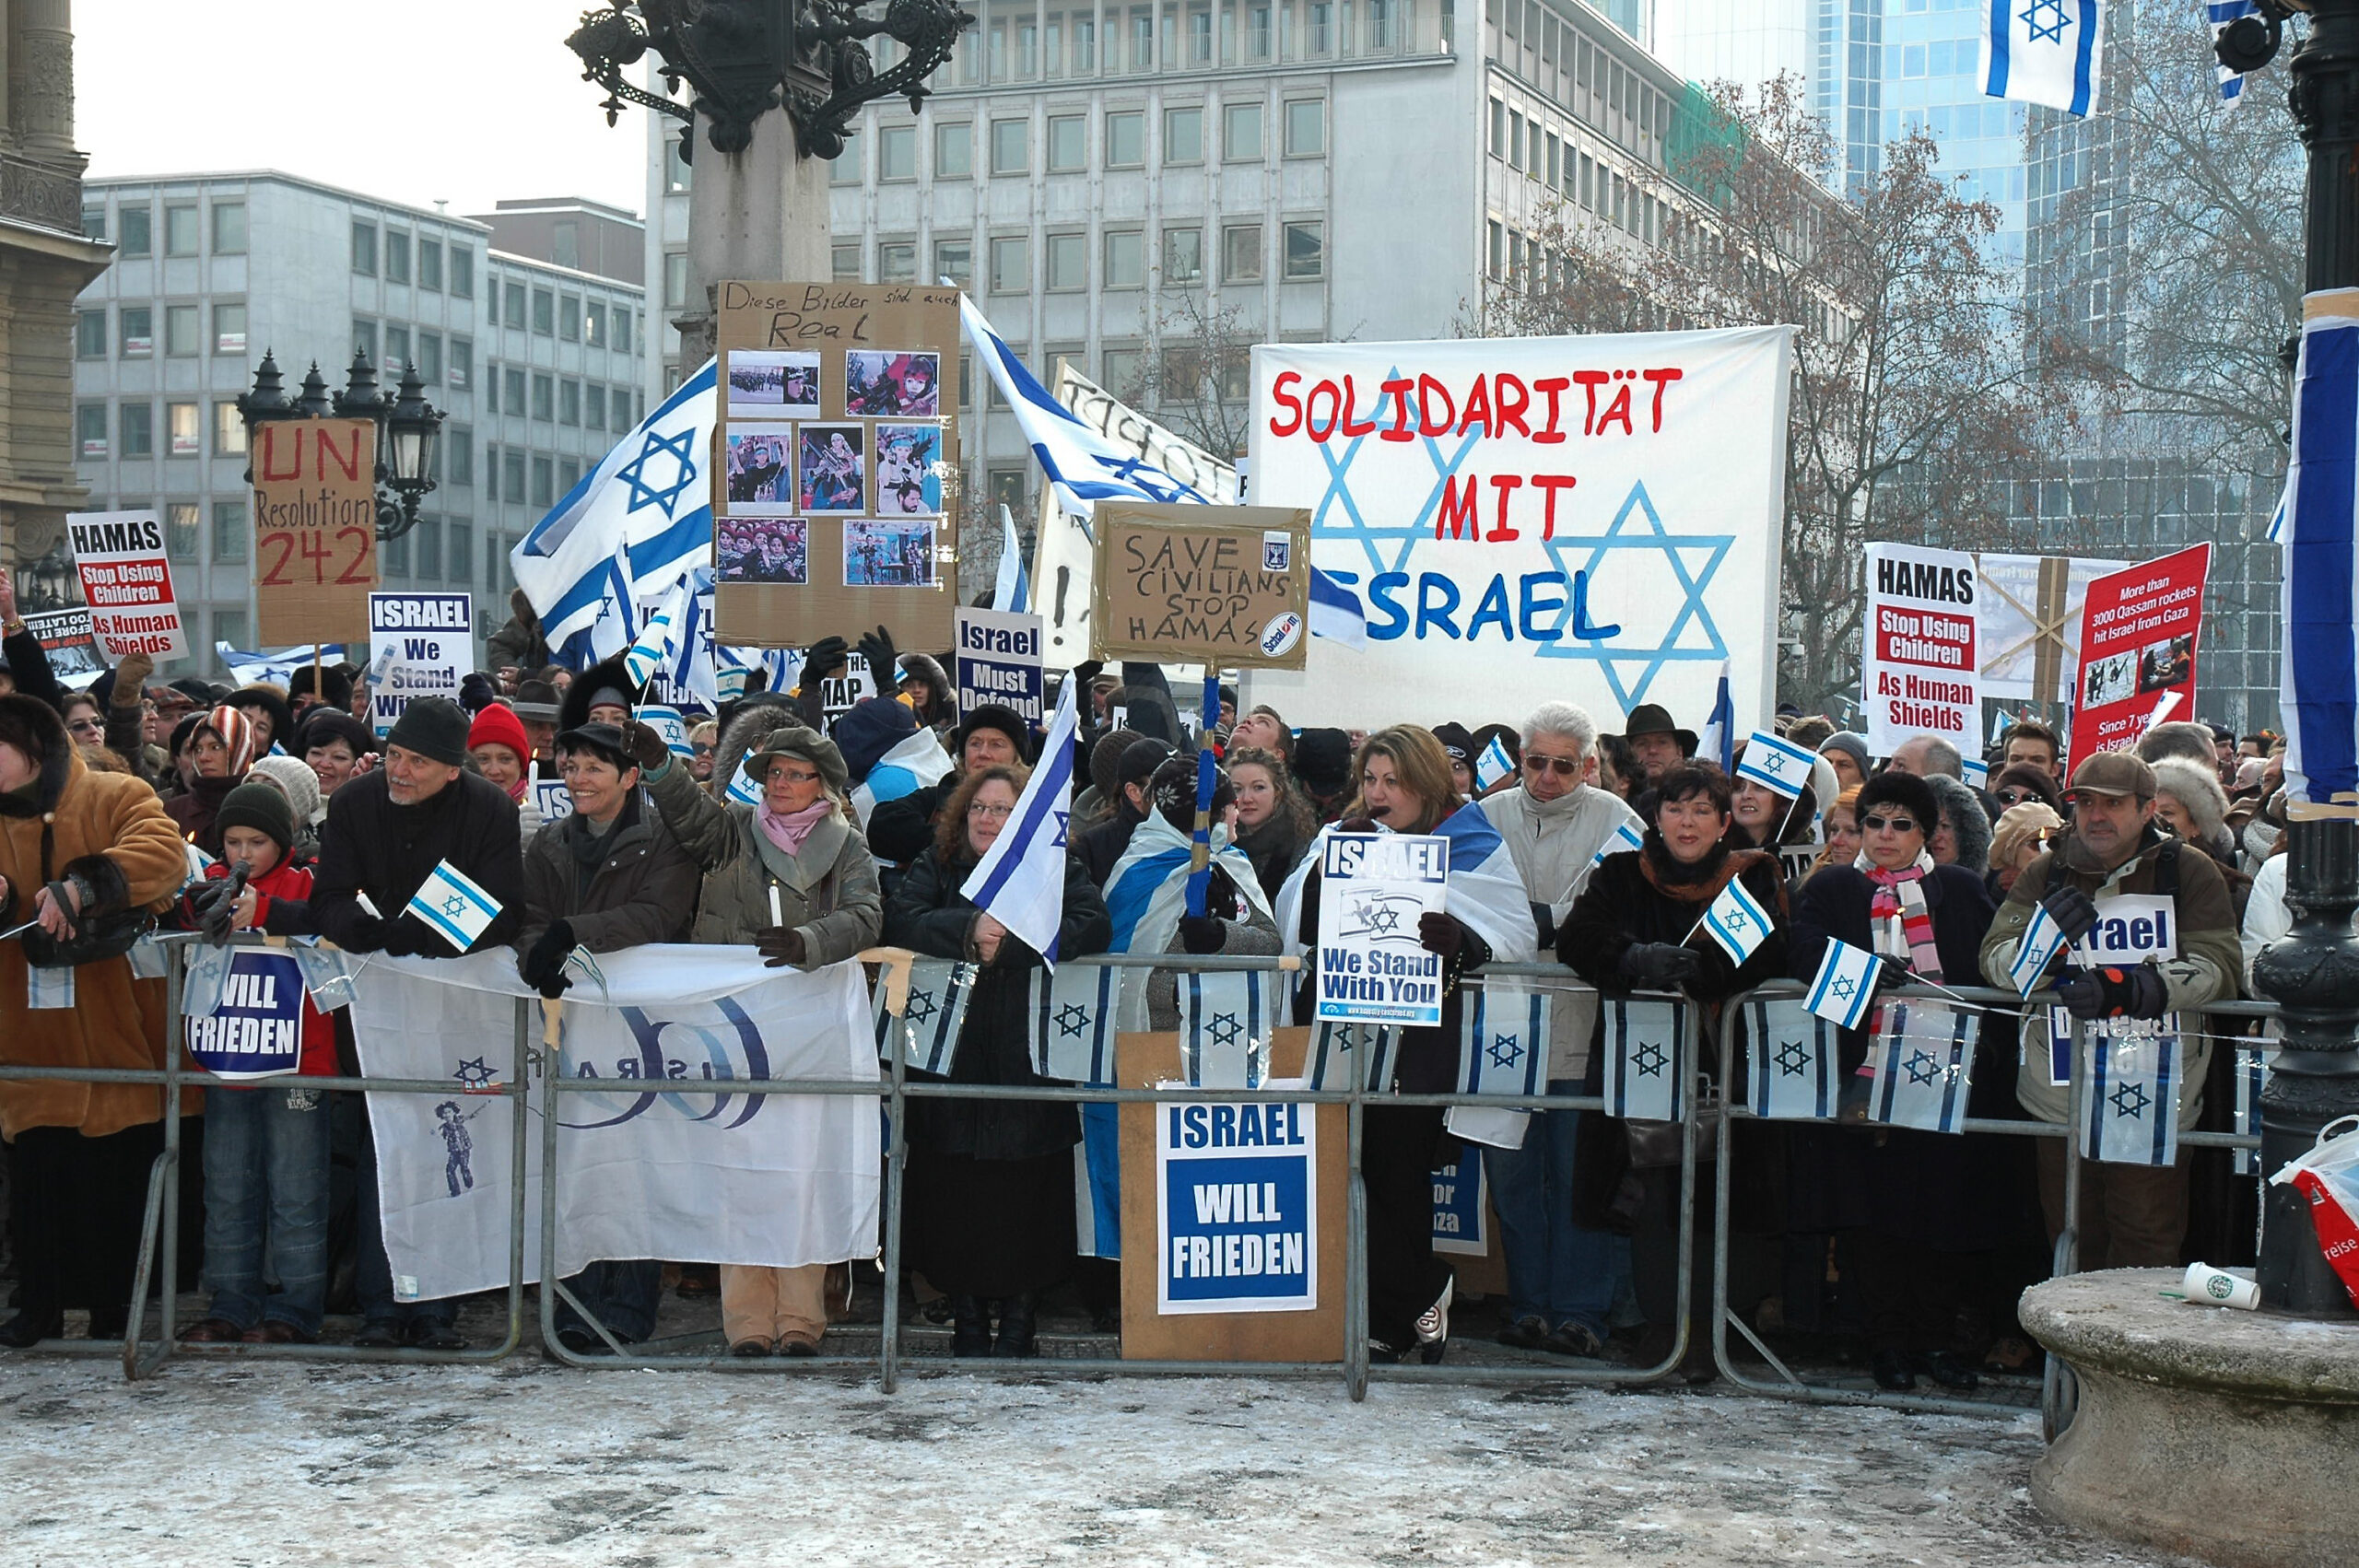 Participants at a demonstration. Collection Jewish Community Wiesbaden